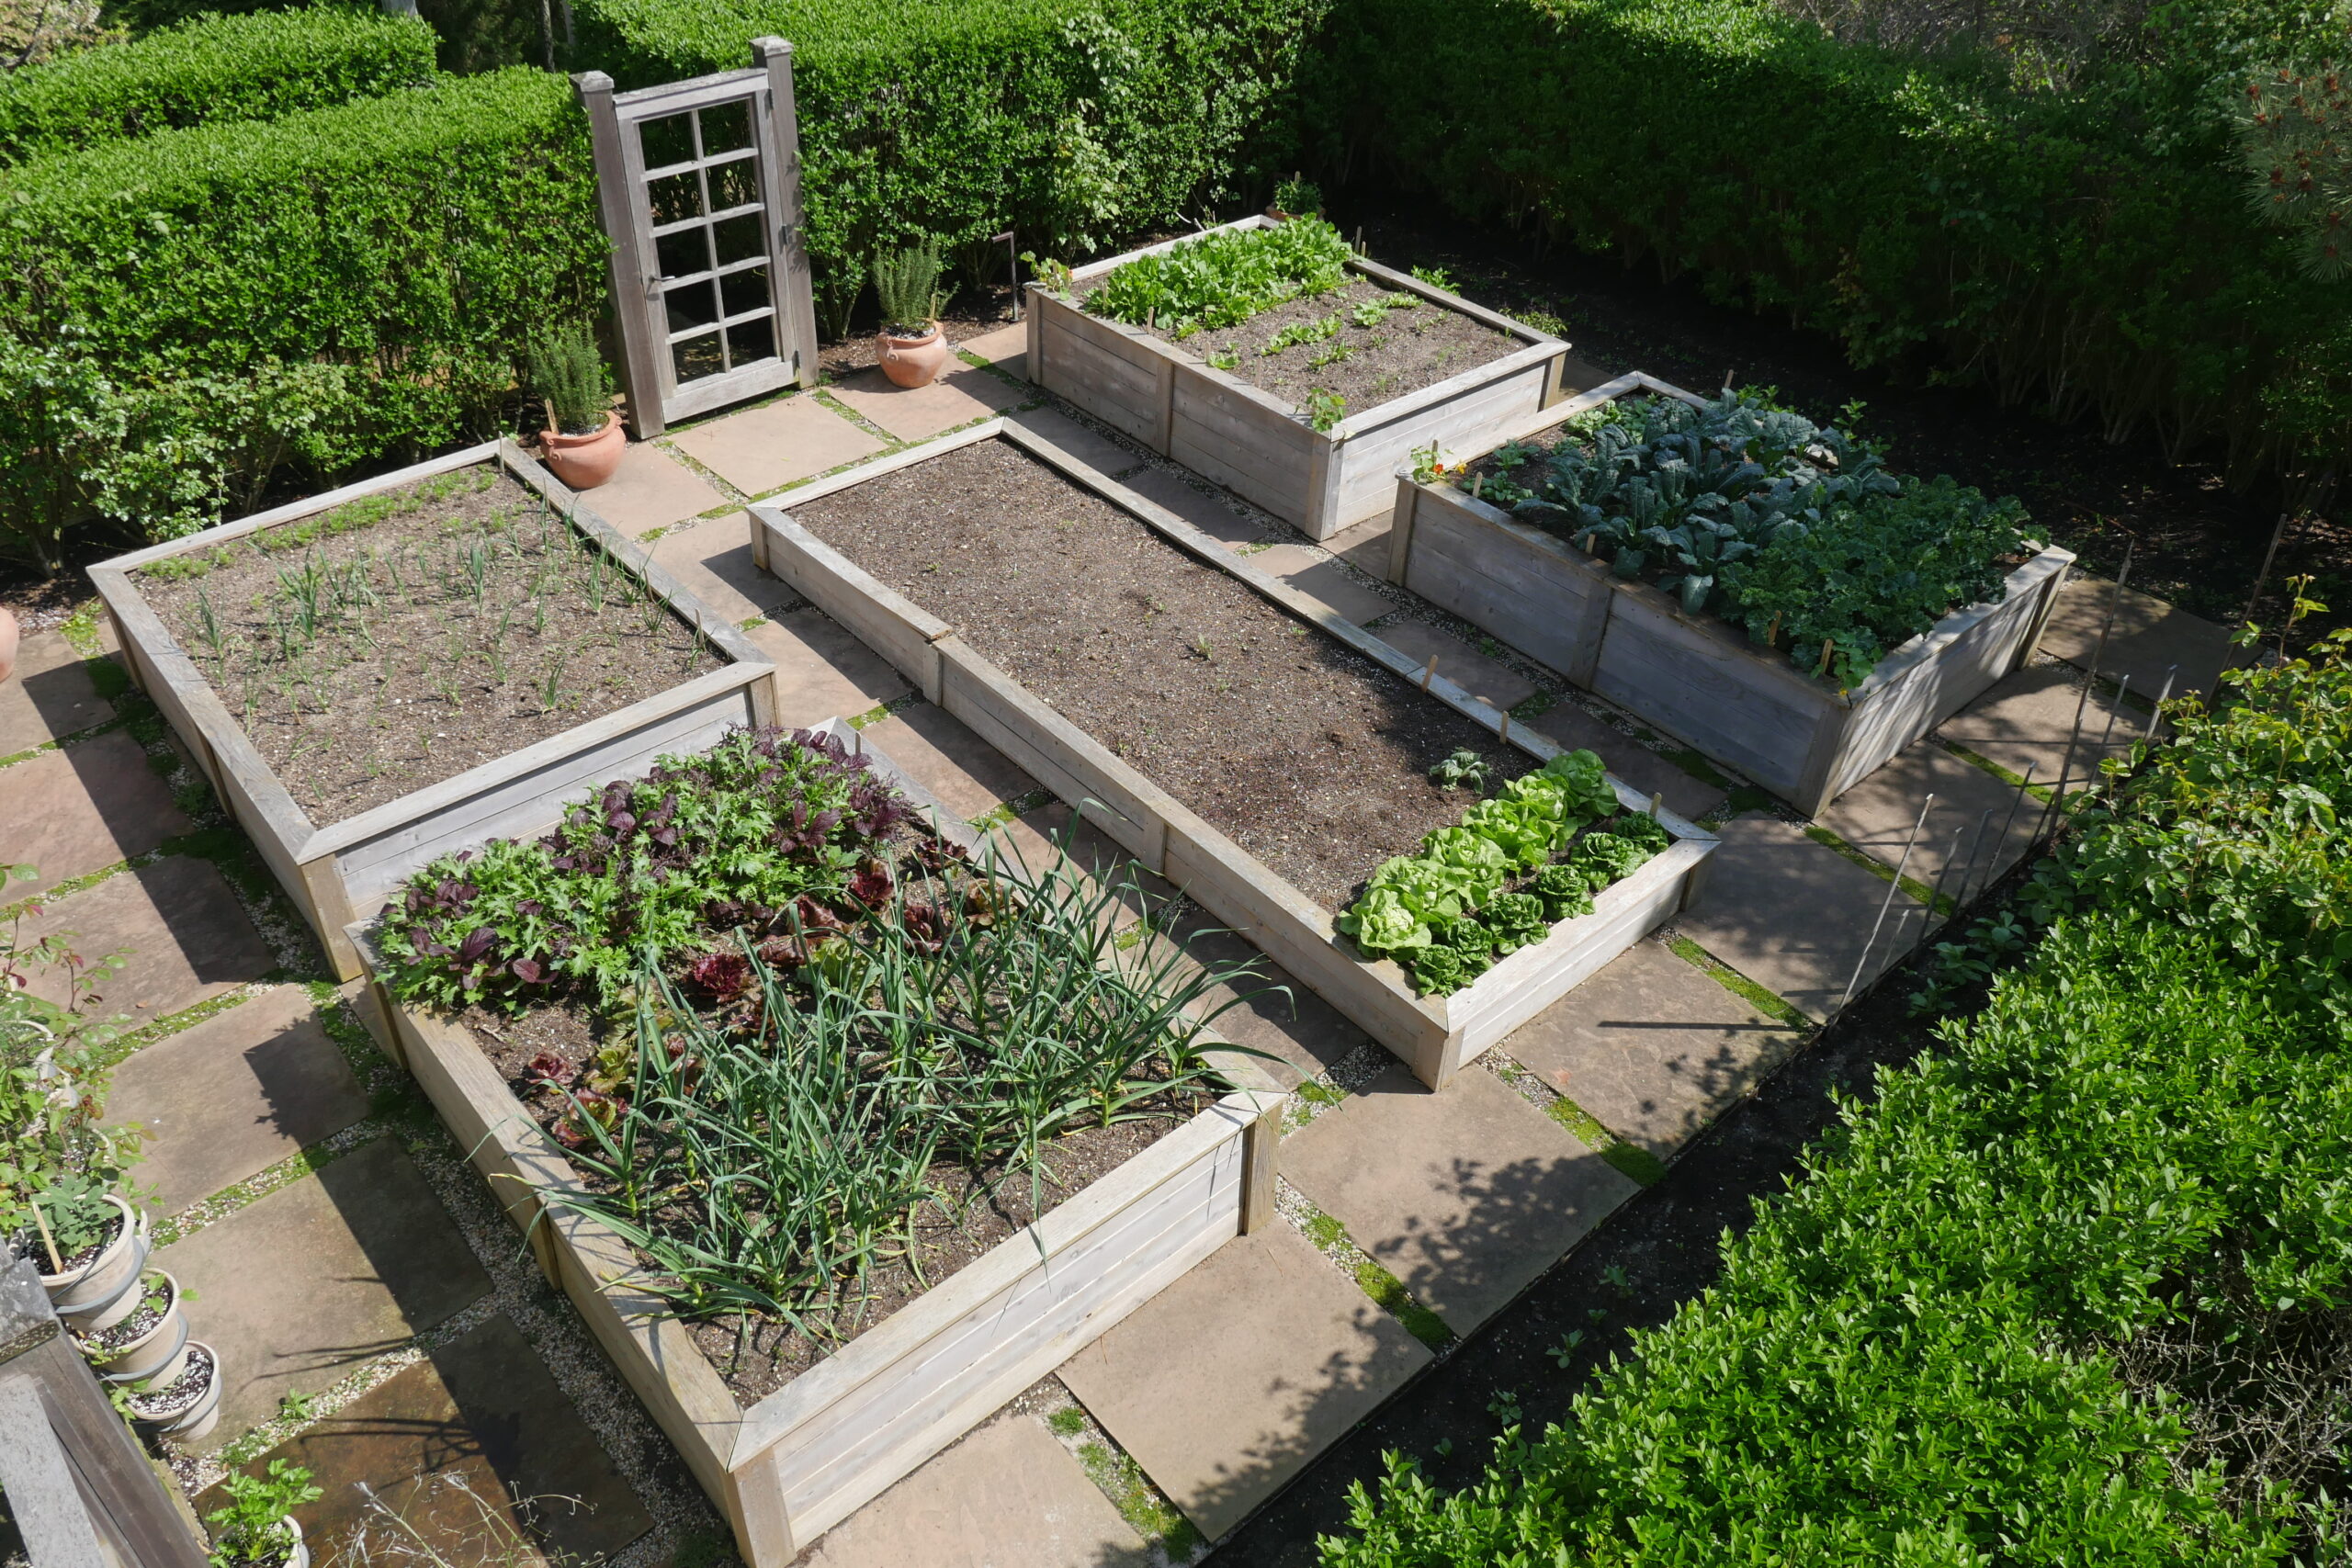 A top-down view of a well-hedged Southampton beachfront courtyard with raised beds.  Once these early crops have been harvested, pot-grown summer crops like tomatoes, squash, peppers and eggplants will be installed, giving the chef a nice supply of summer produce.
ANDREW MESSINGER